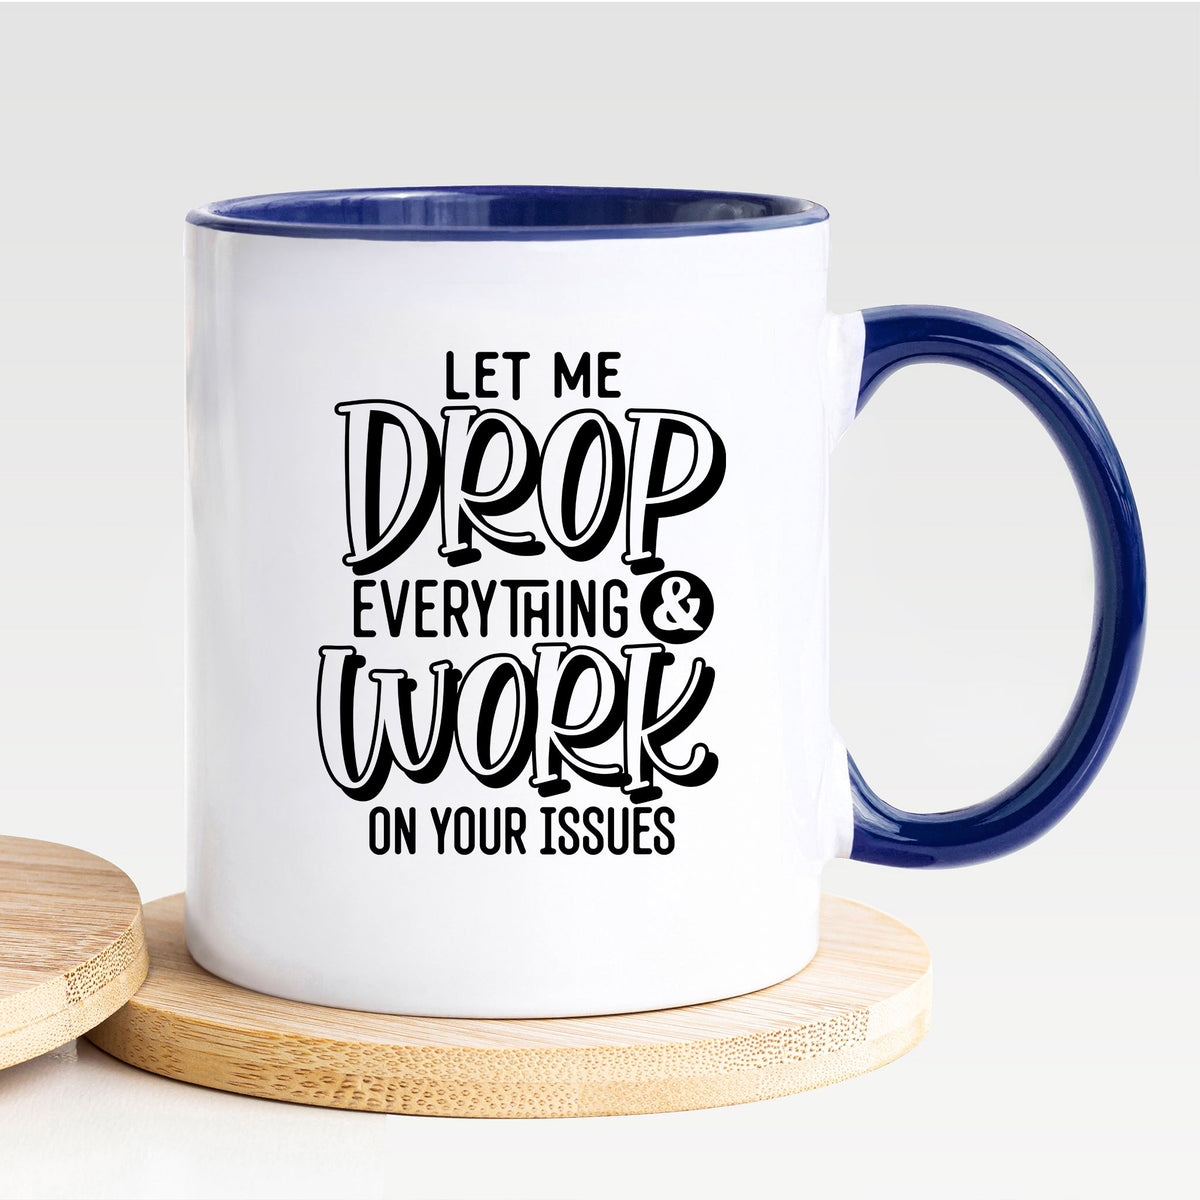 Let Me Drop Everything & Work On Your Issues - Mug